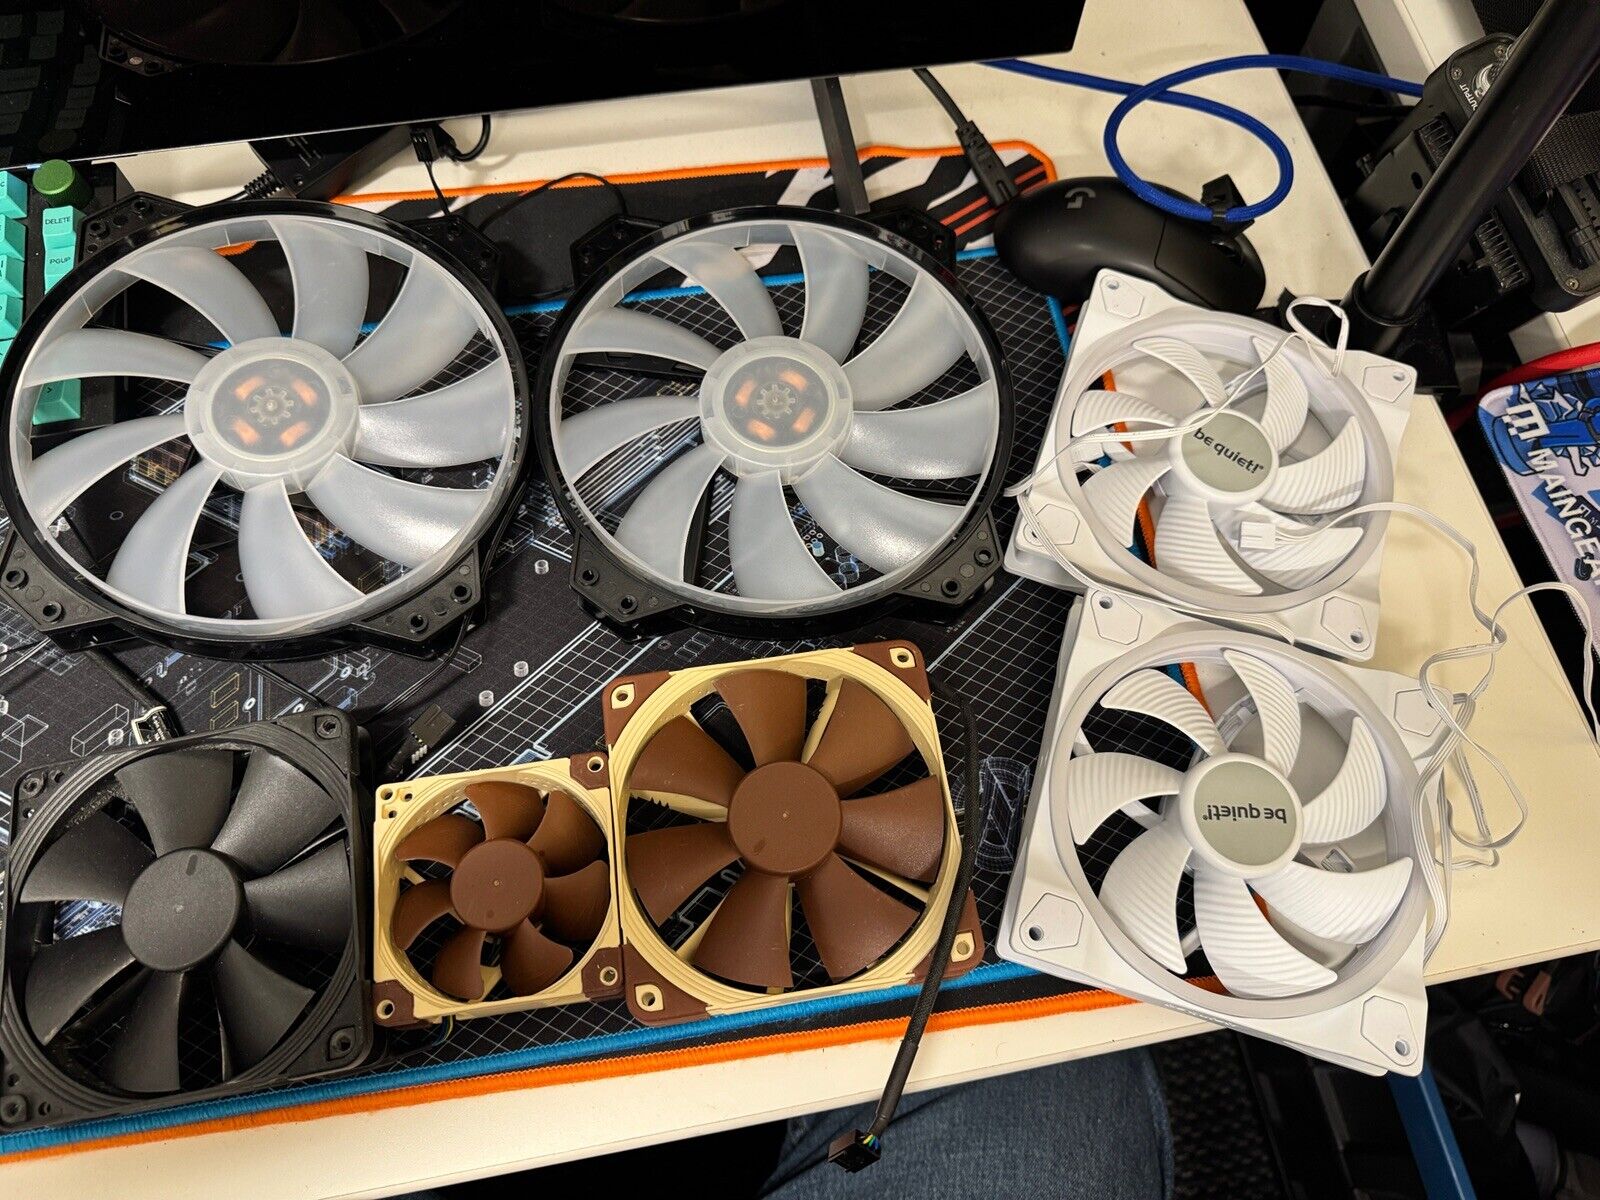 Lot Of 8 Pc Fans, Noctua, Be Quiet And Cooler Master 120mm, 140mm, 200mm